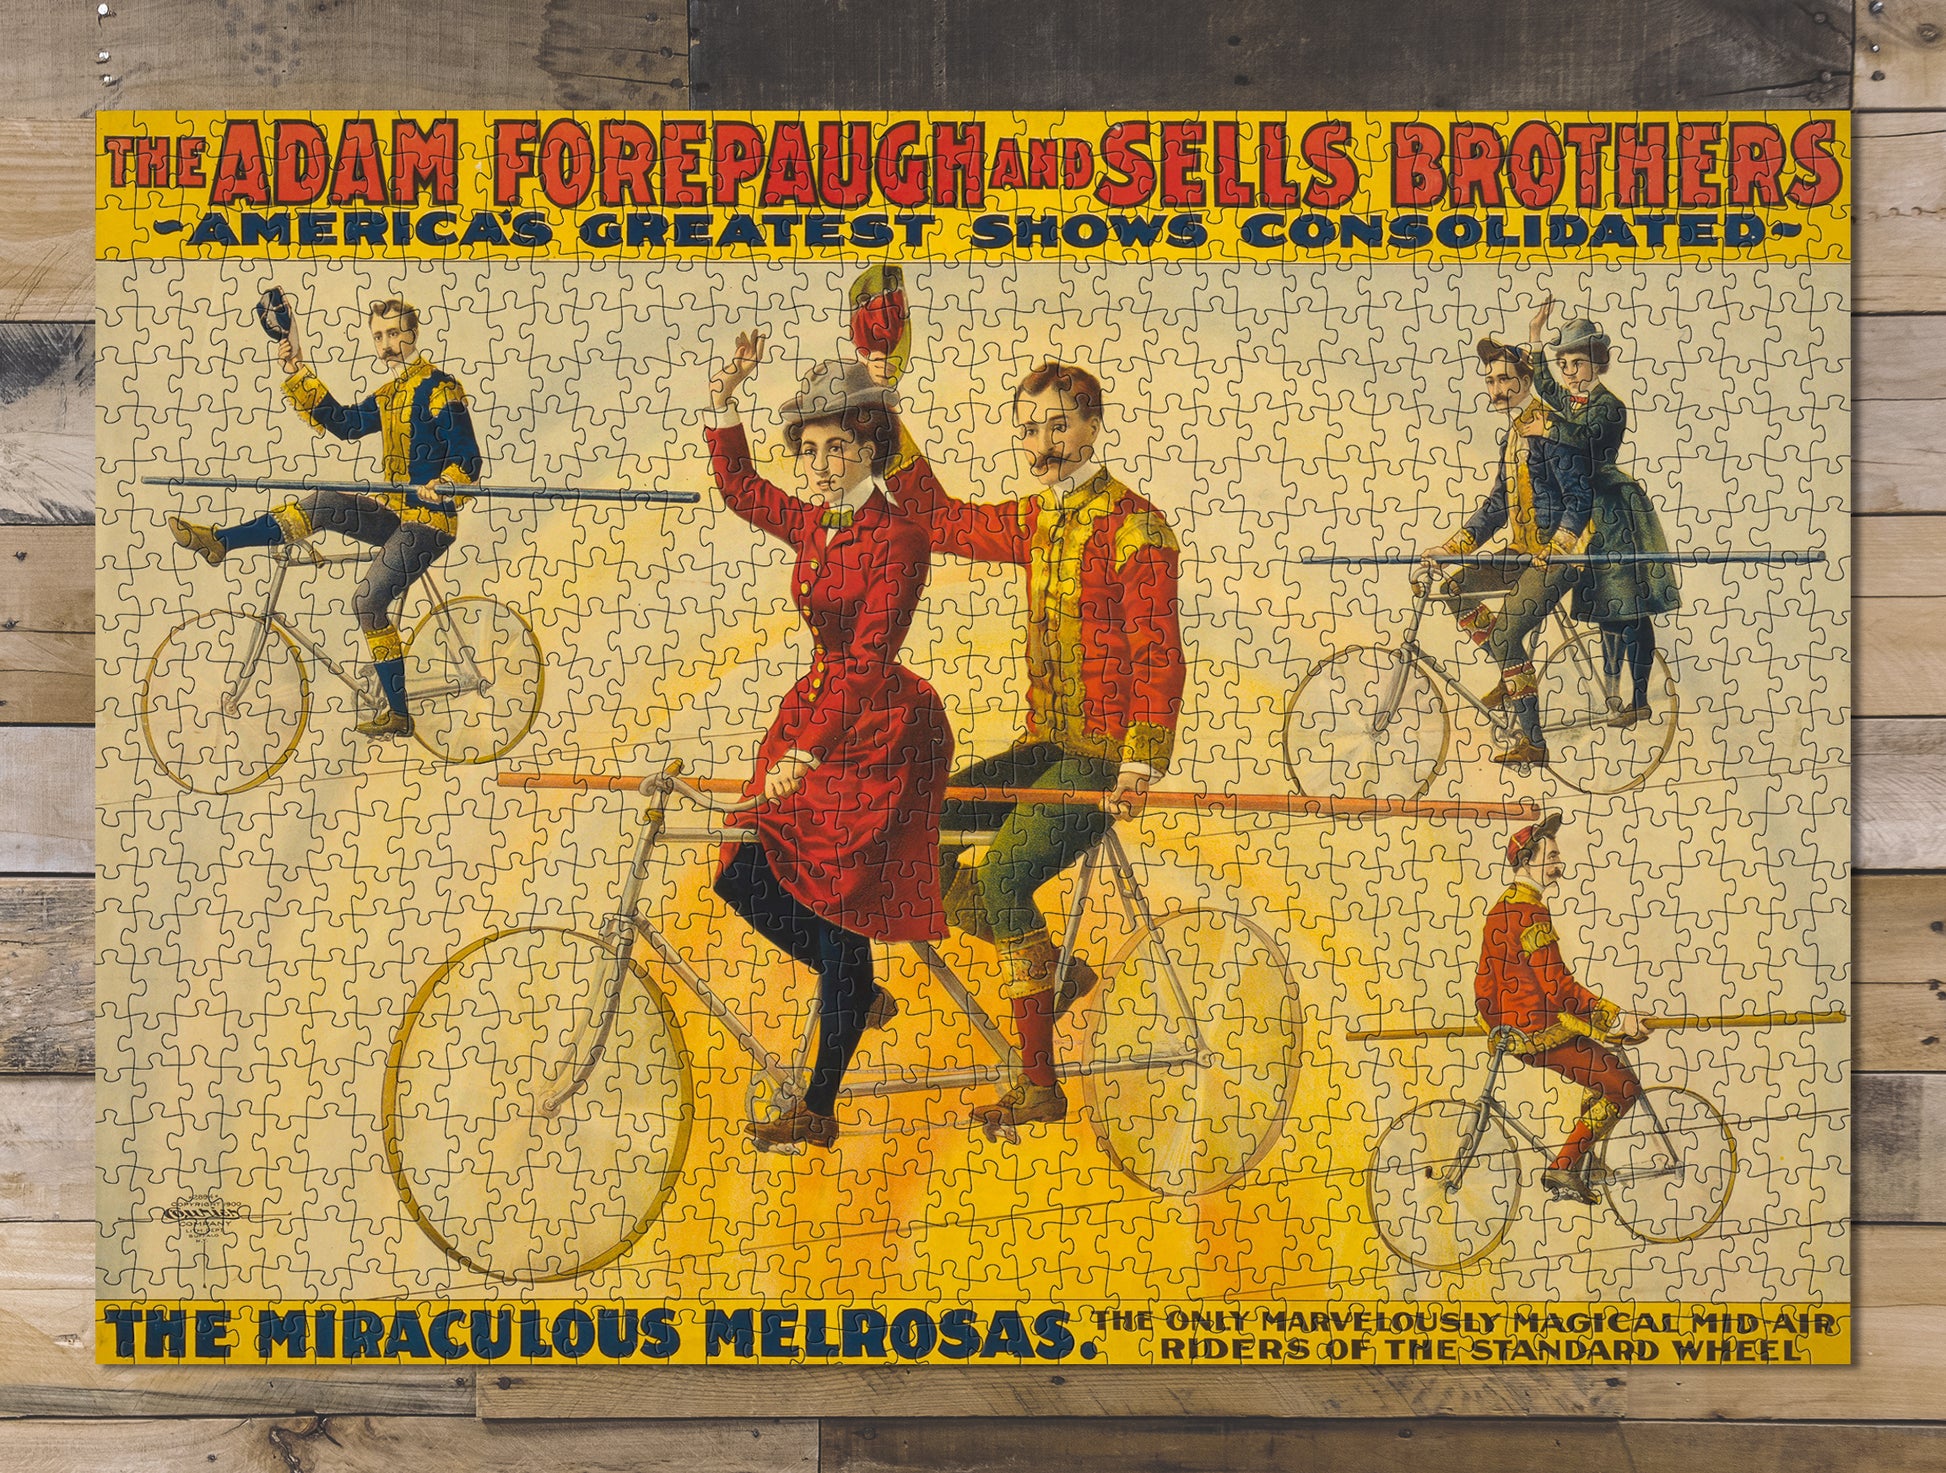 1000 piece puzzle 1900 Photo: The Adam Forepaugh & Sells Brothers The Miraculous Melrosas Cyclists